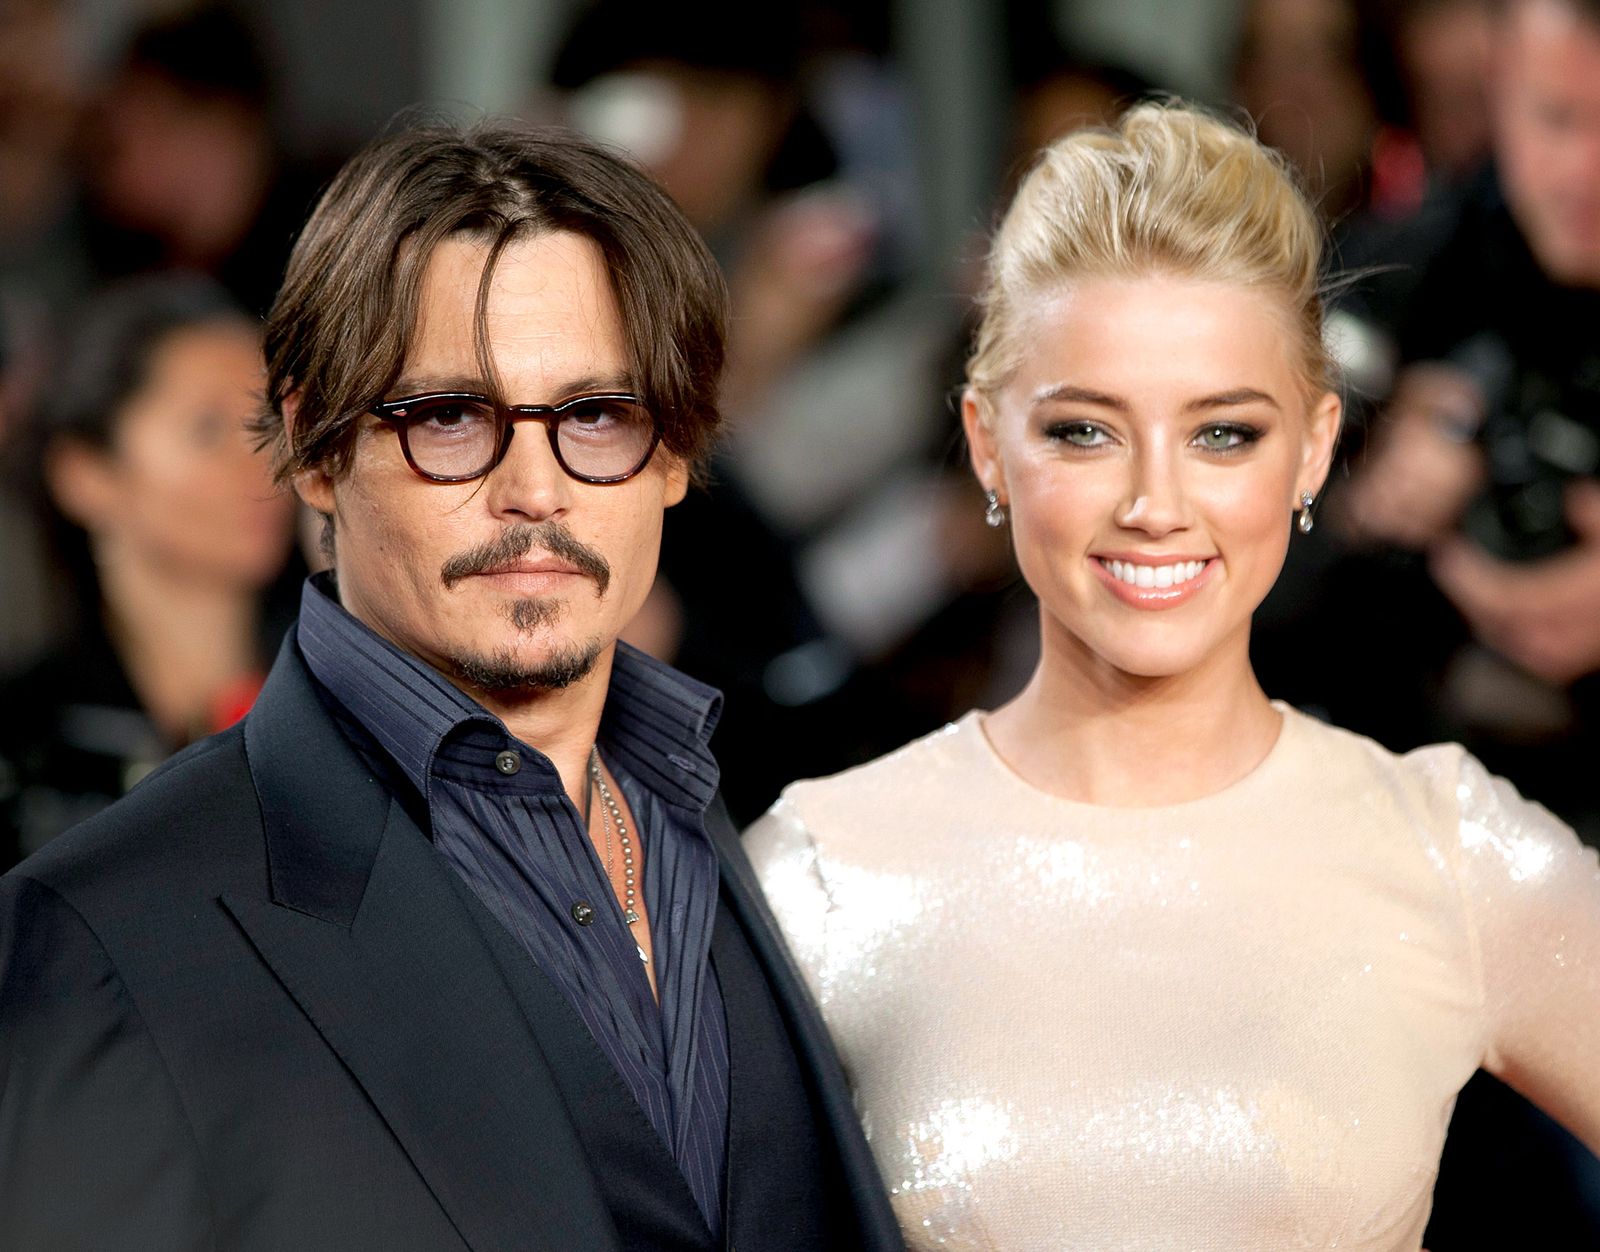 An Emotional Experience for Amber Heard